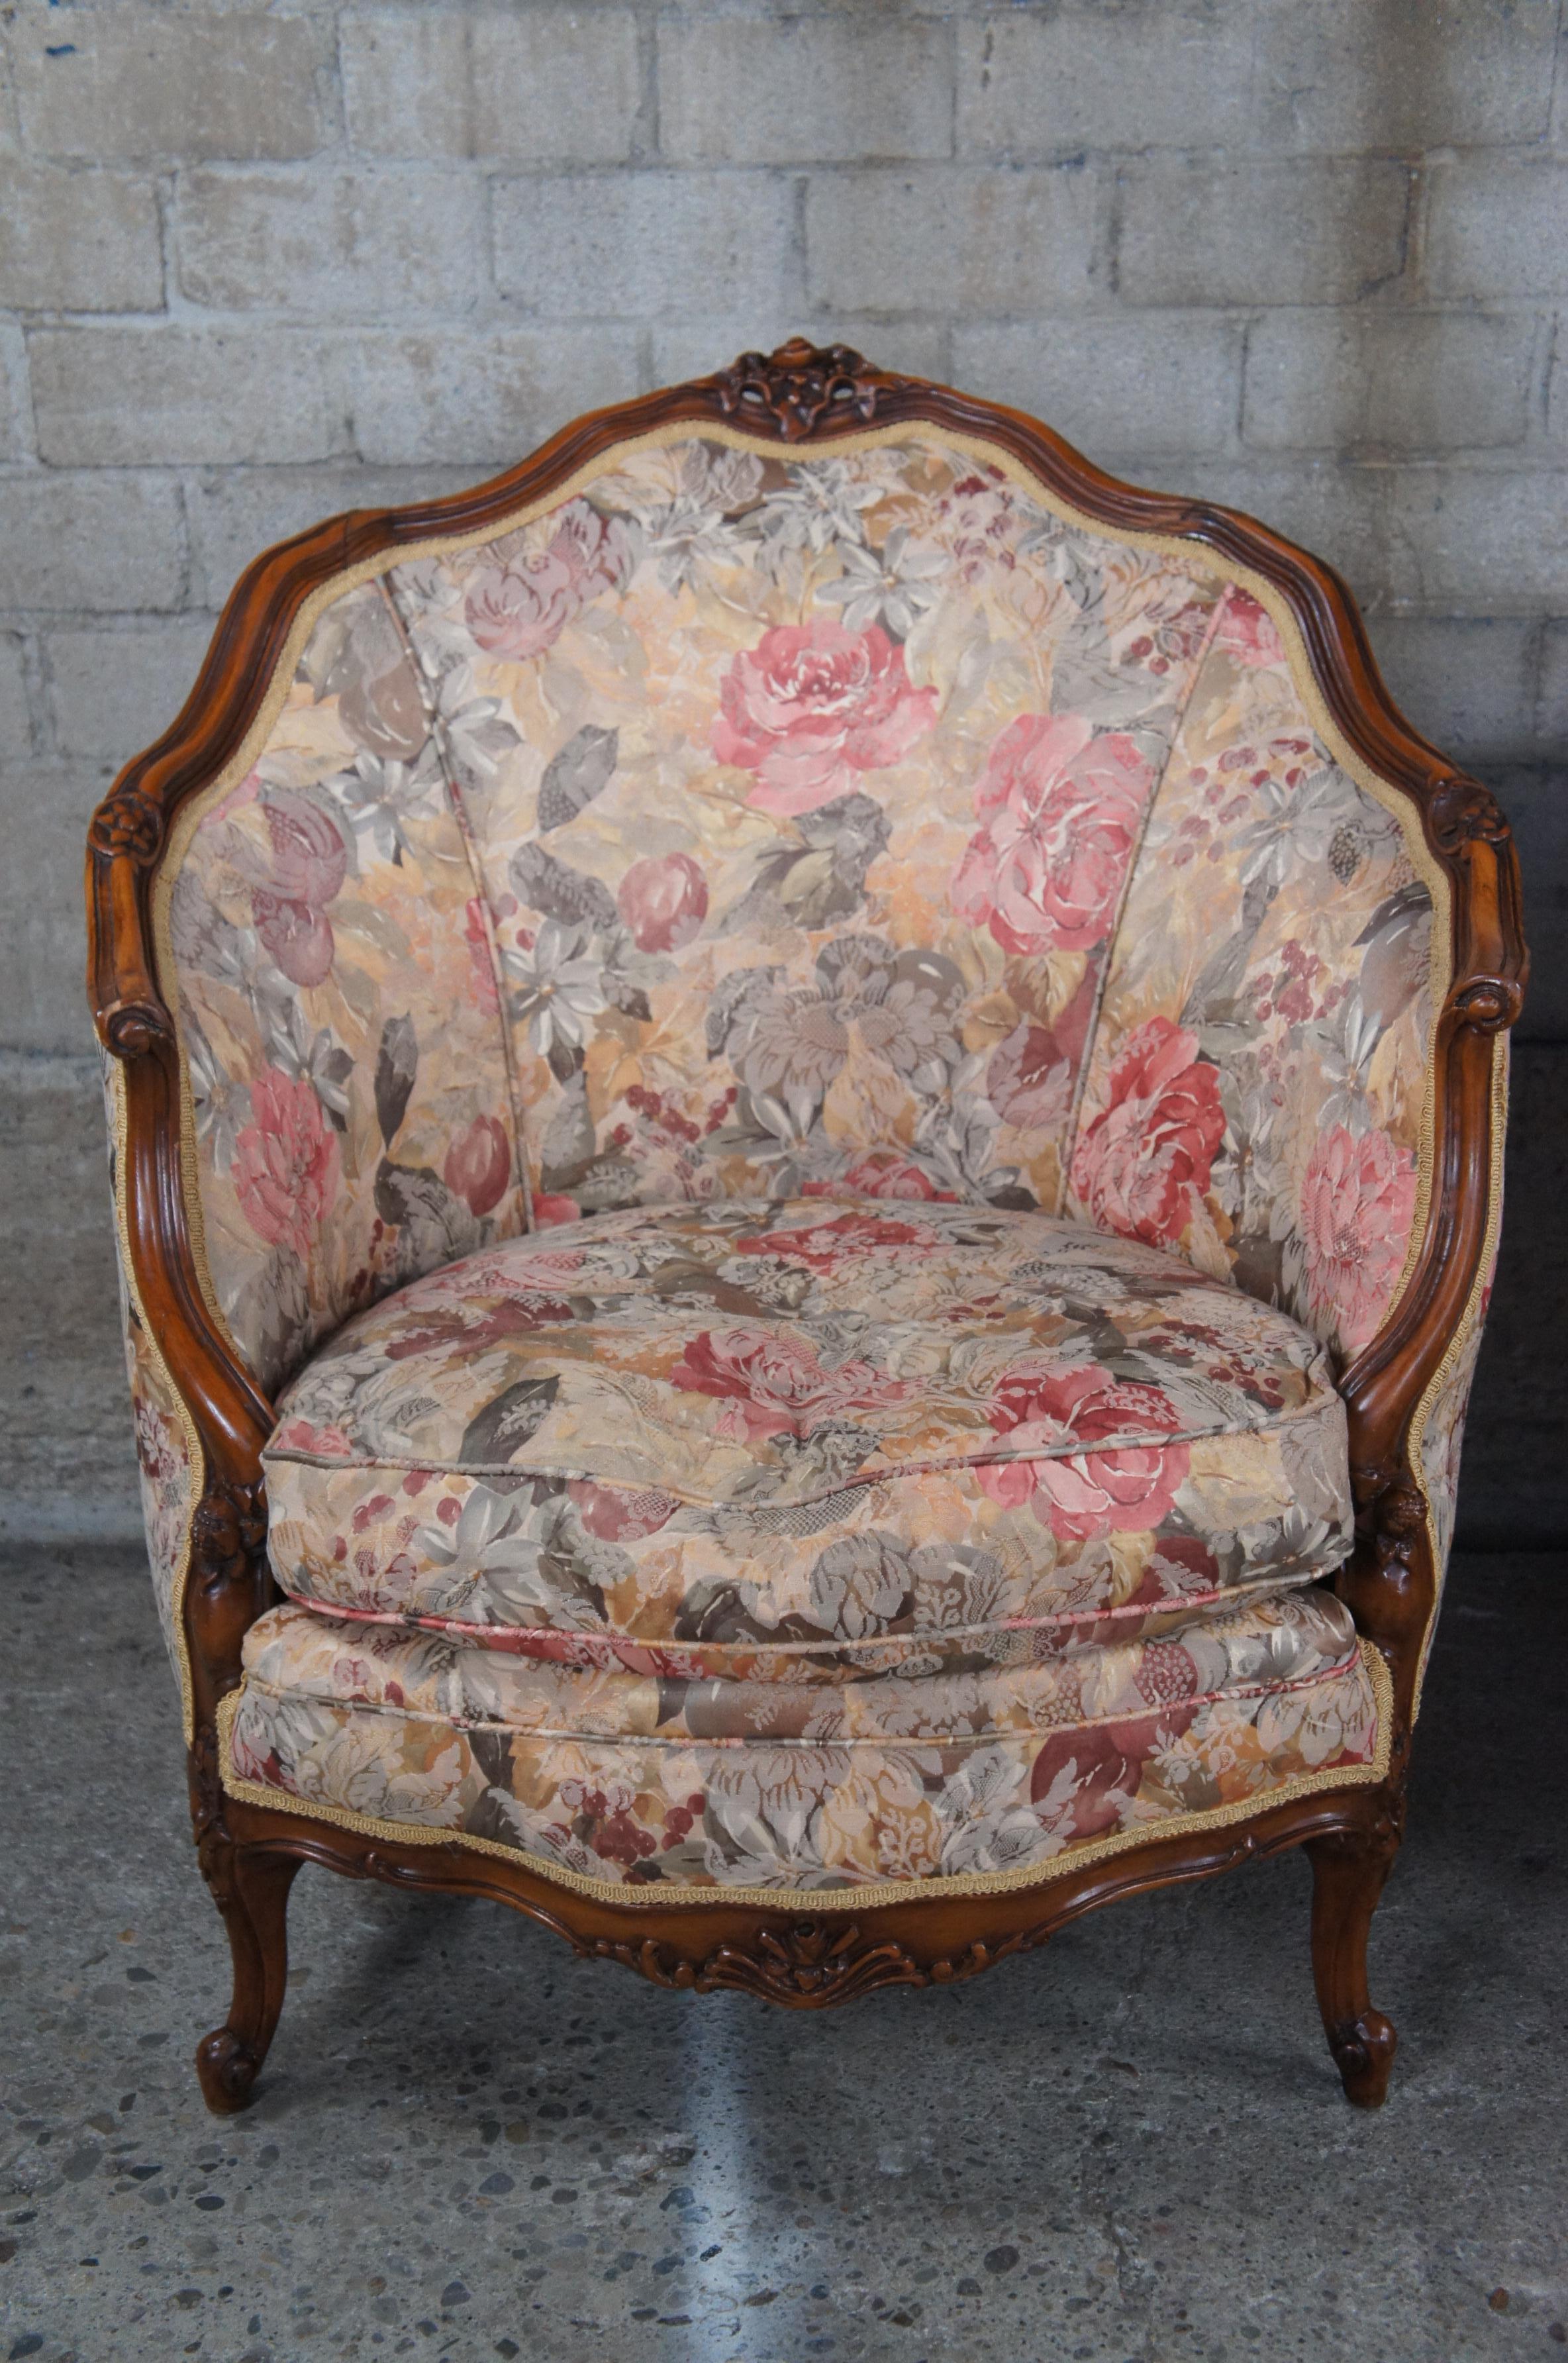 Upholstery 2 Antique French Louis XV Style Walnut Carved His & Hers Bergere Club Arm Chairs